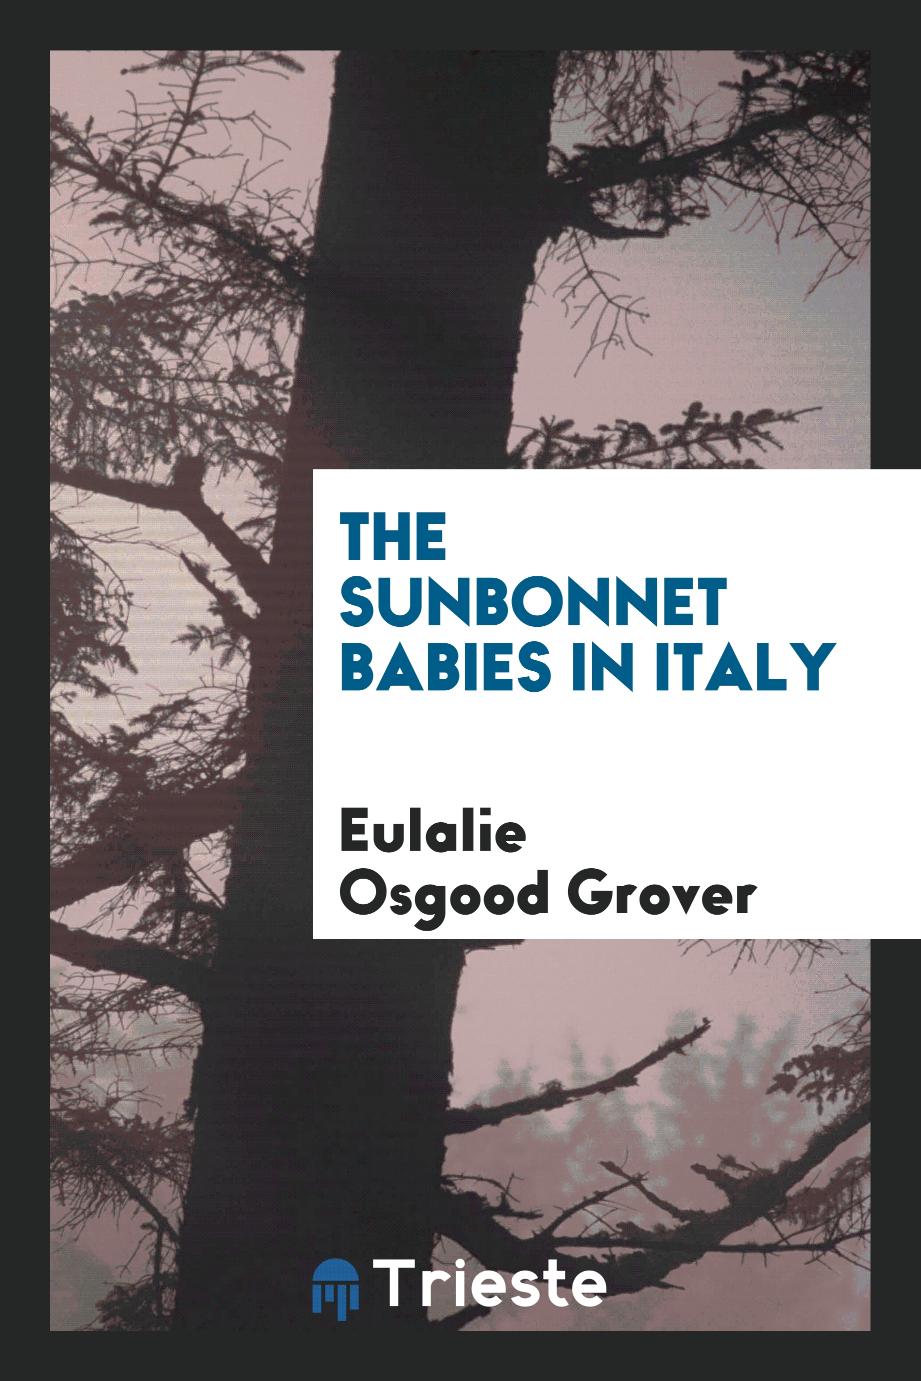 Eulalie Osgood Grover - The sunbonnet babies in Italy